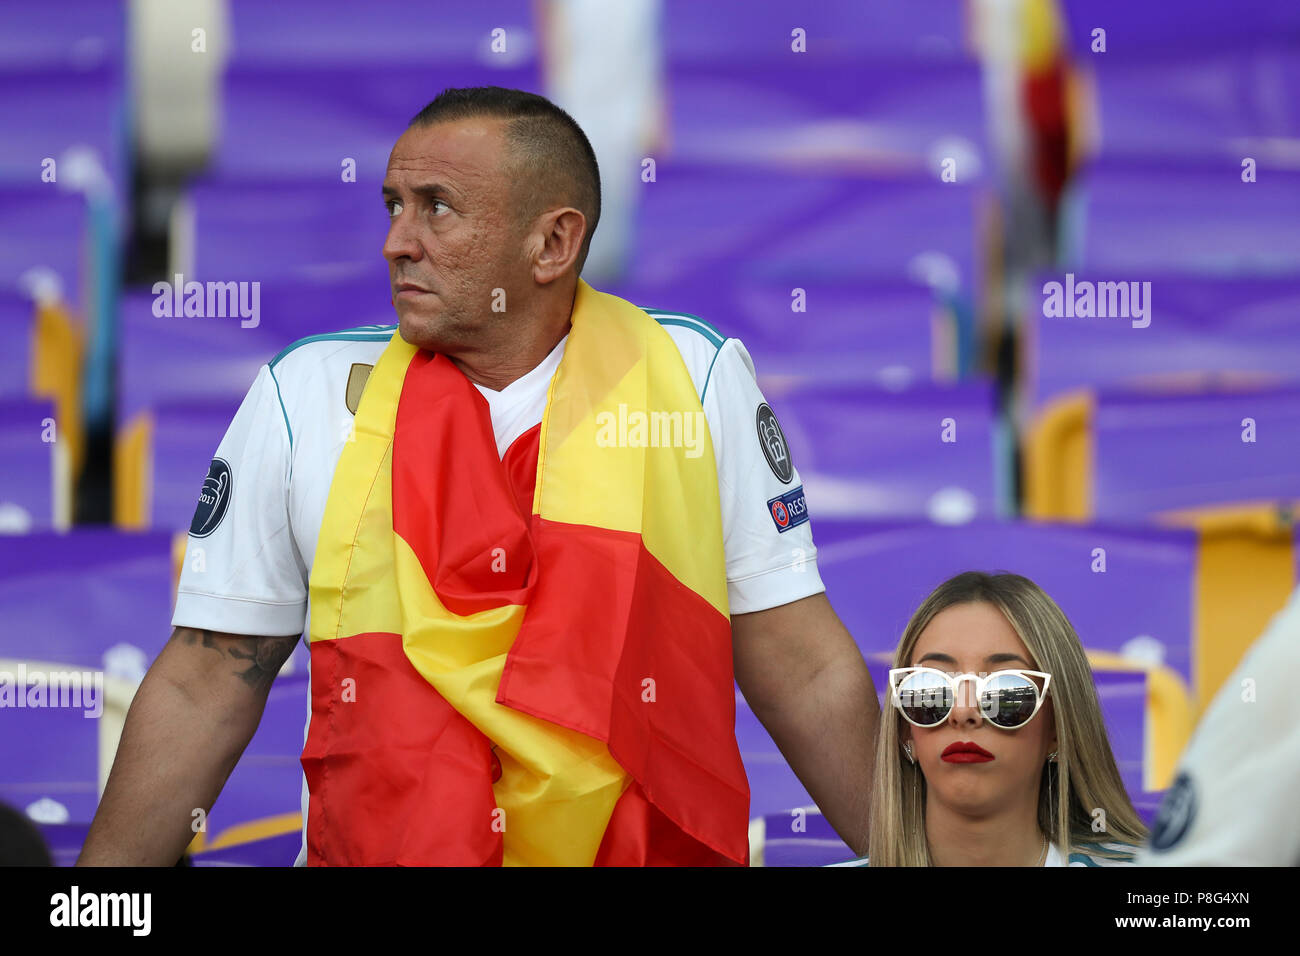 Kyiv Ukraine May 26 18 Real Madrid Fans And Wife Of Football Player Uefa Champions League Final Real Madrid Liverpool Olympic Nsc Stadium Stock Photo Alamy